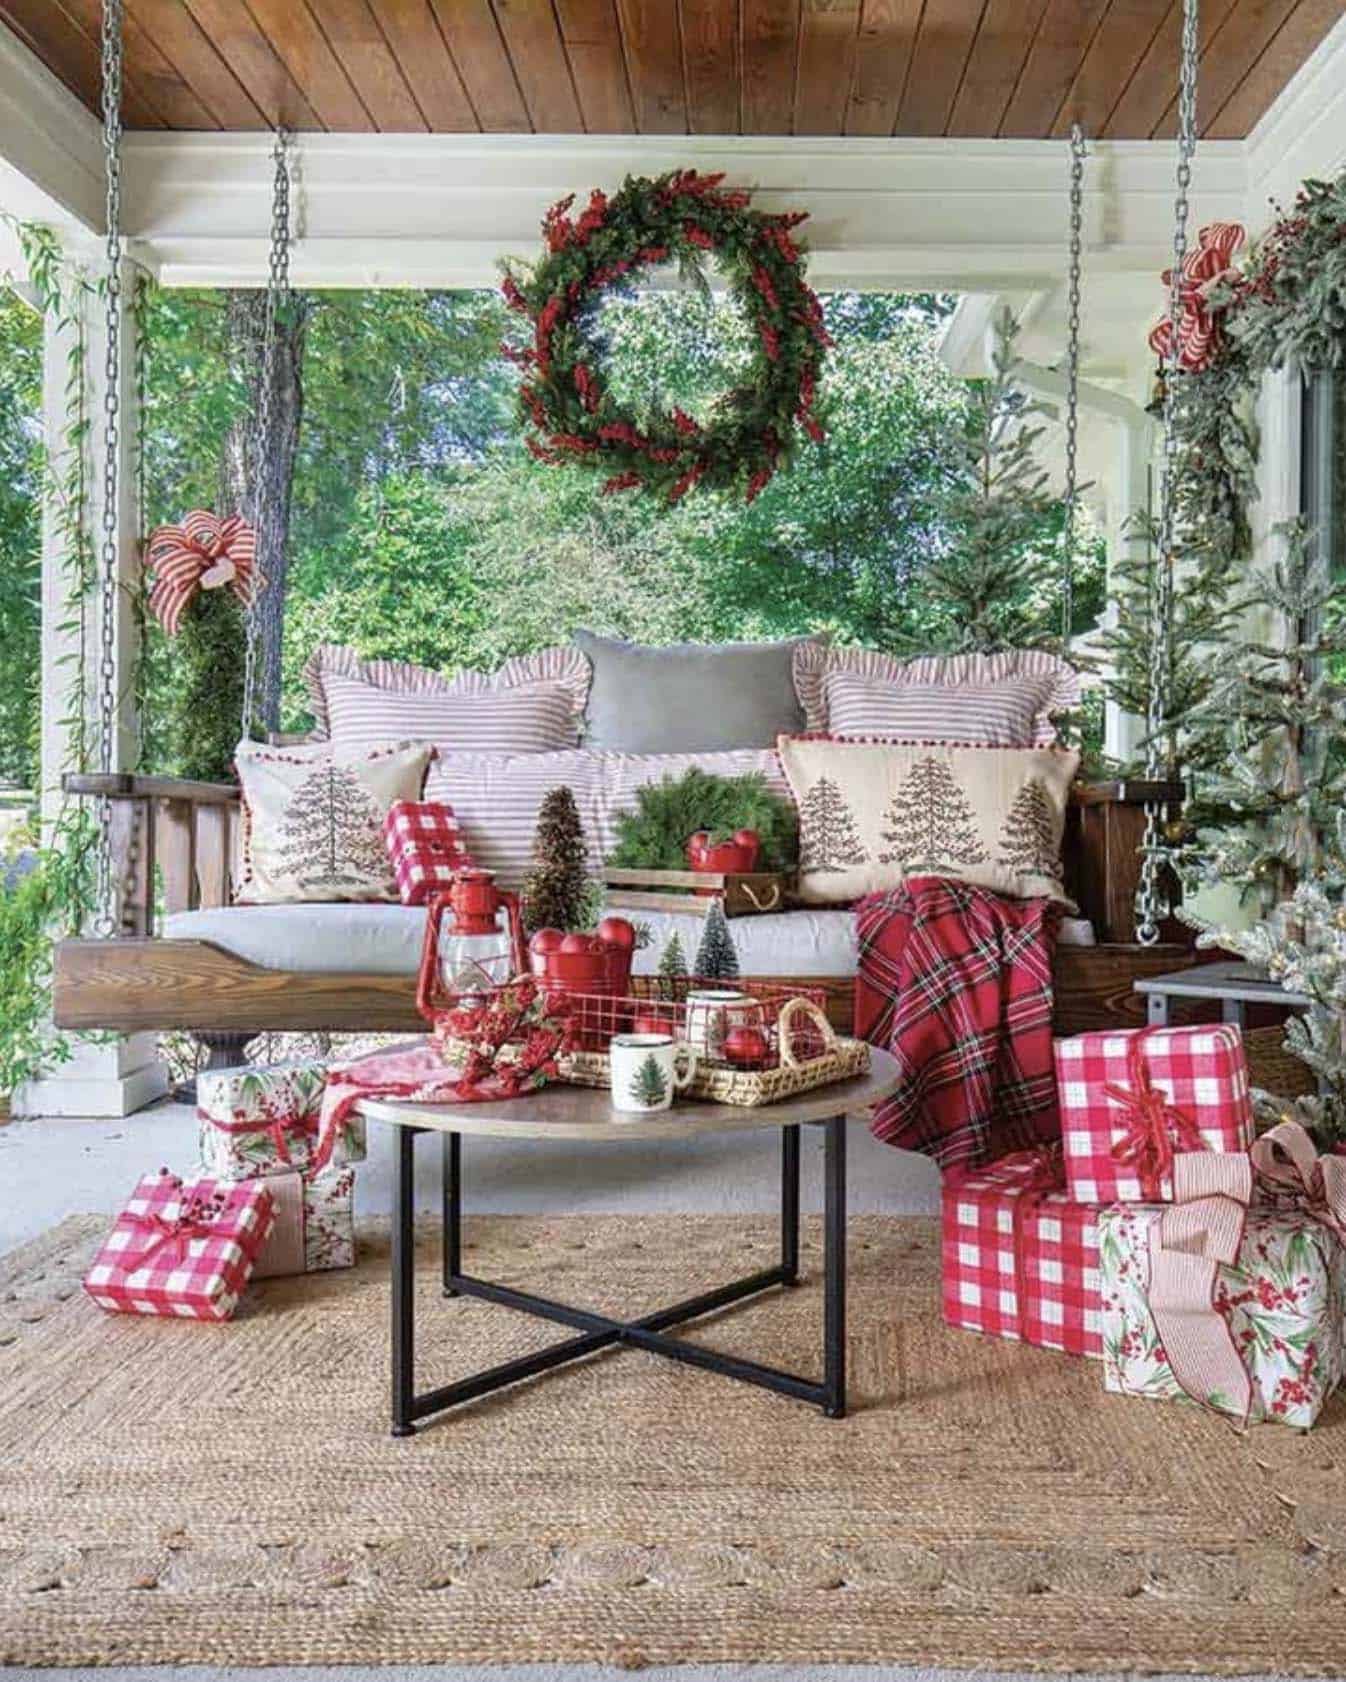 cozy Christmas decorated front porch with a hanging swing